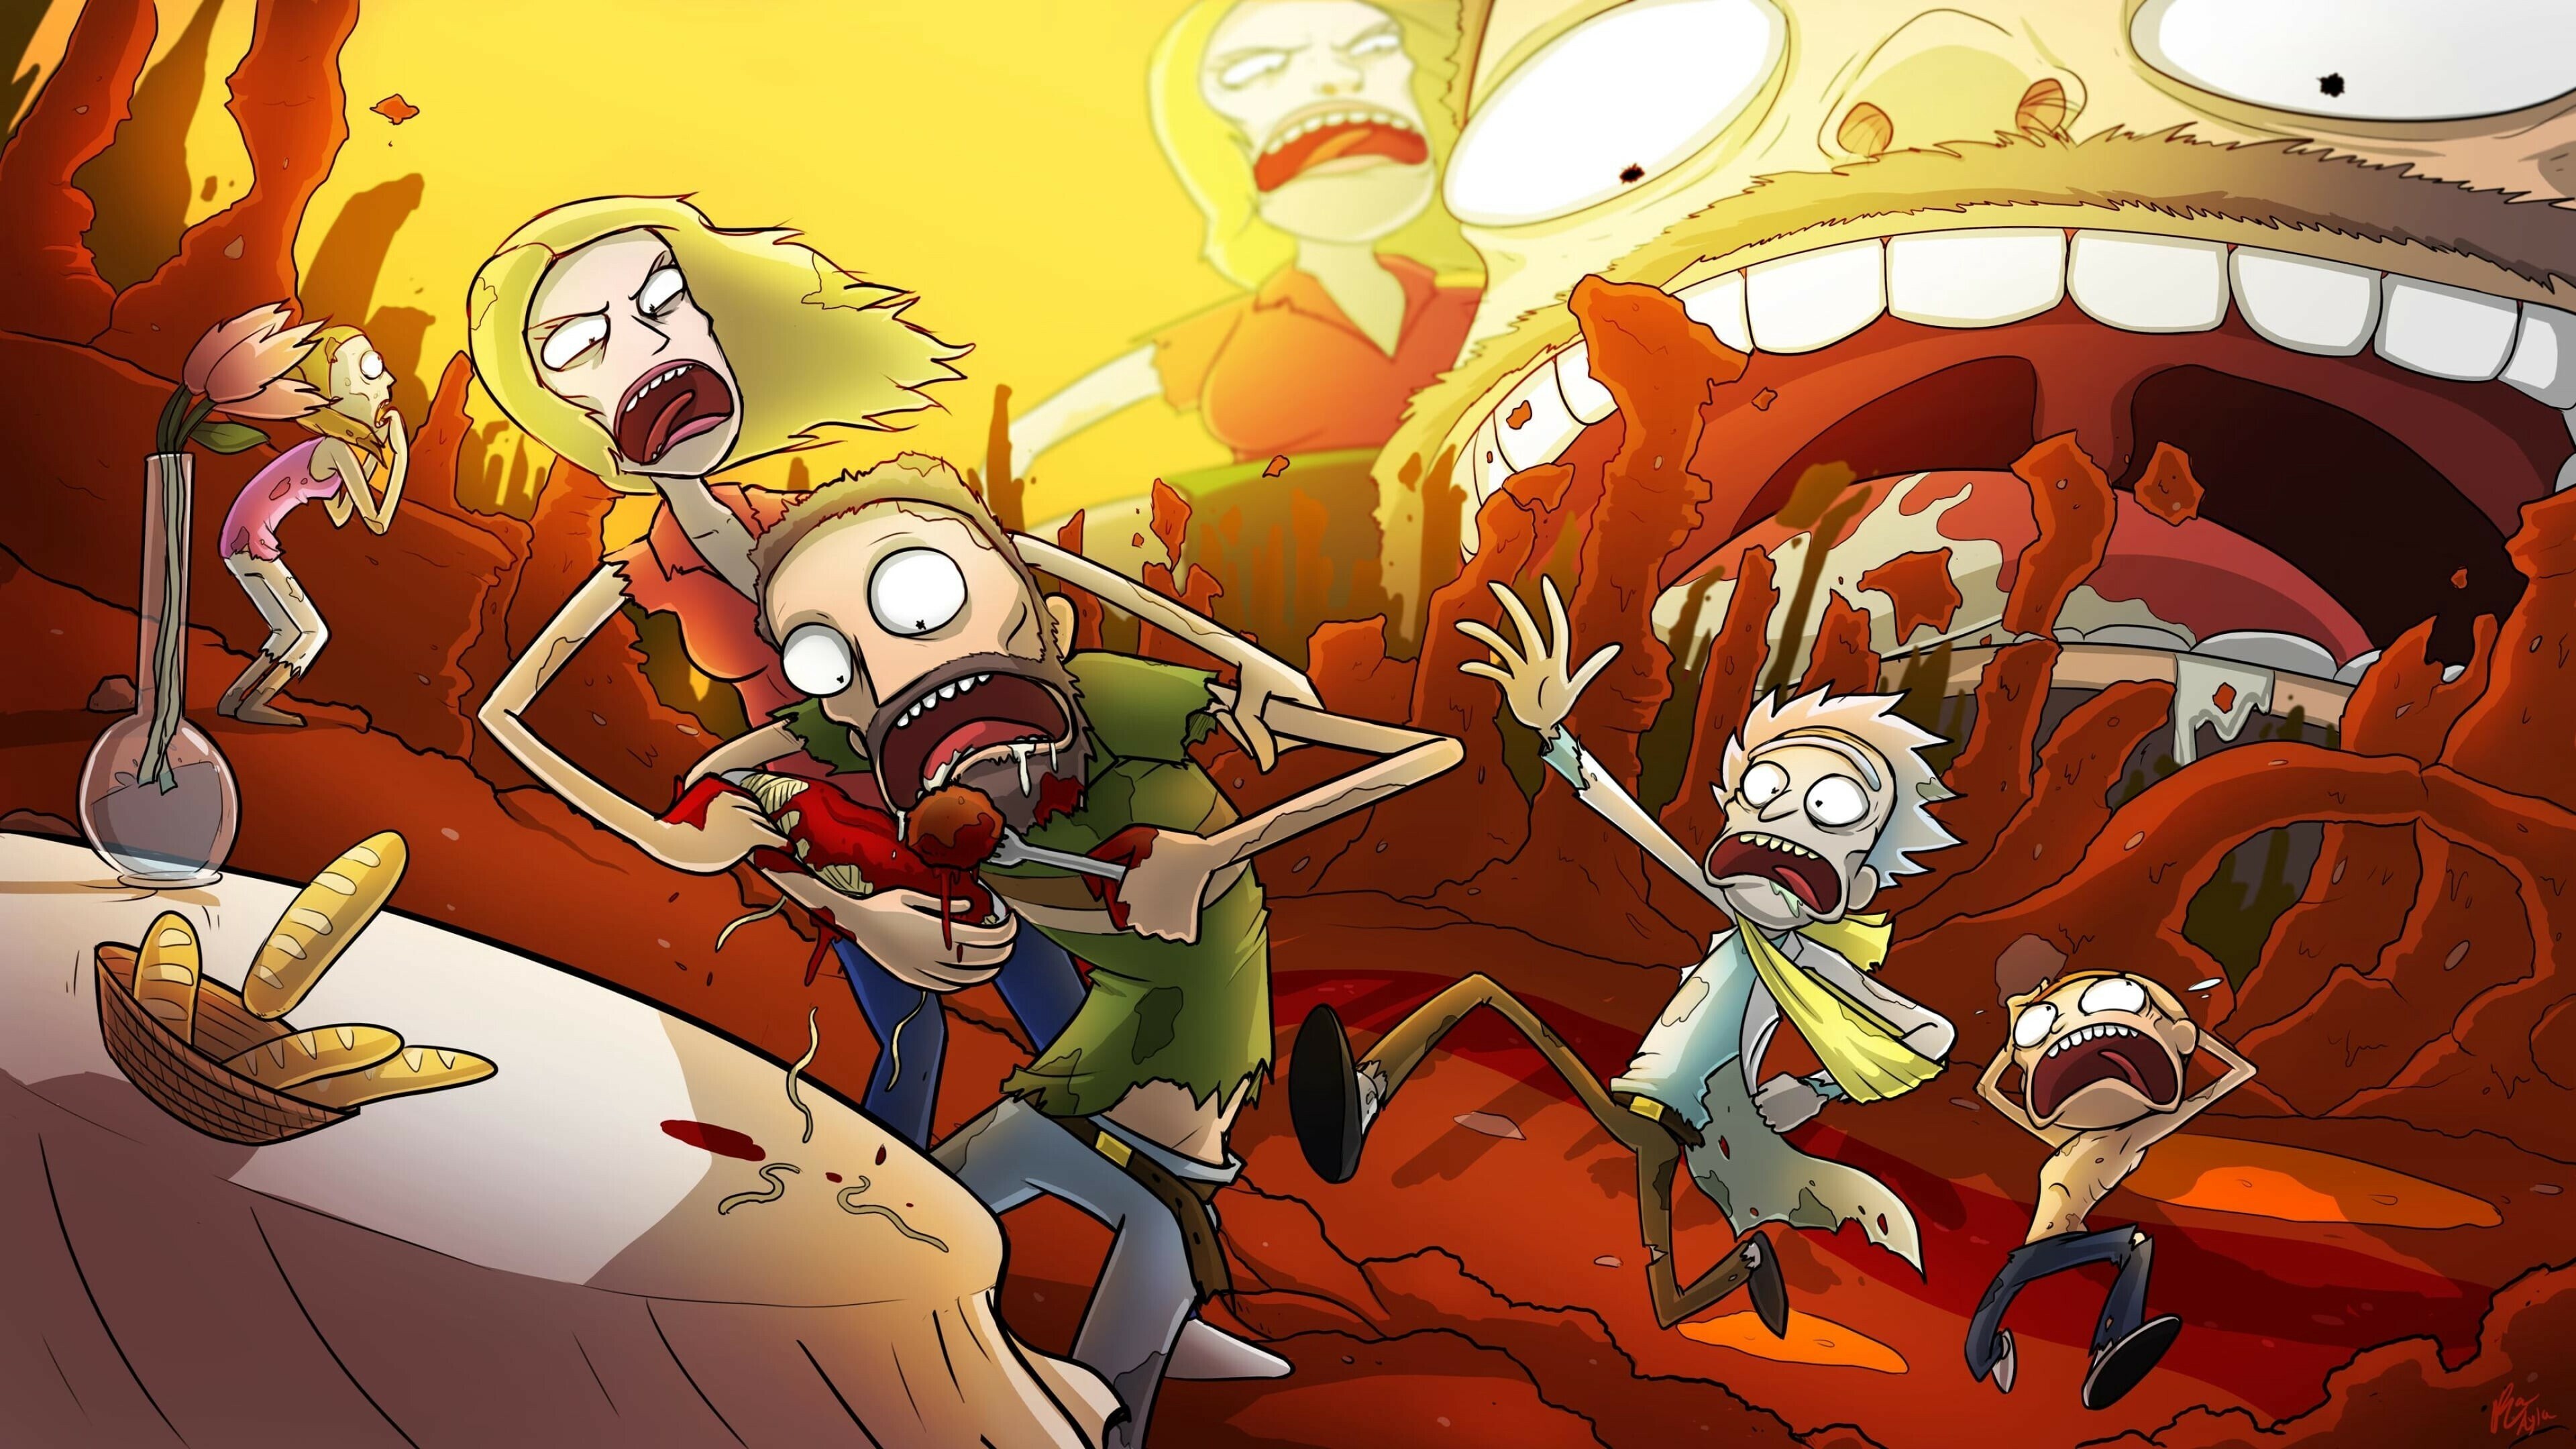 Rick and Morty: An American adult animated science-fiction sitcom. 3840x2160 4K Background.